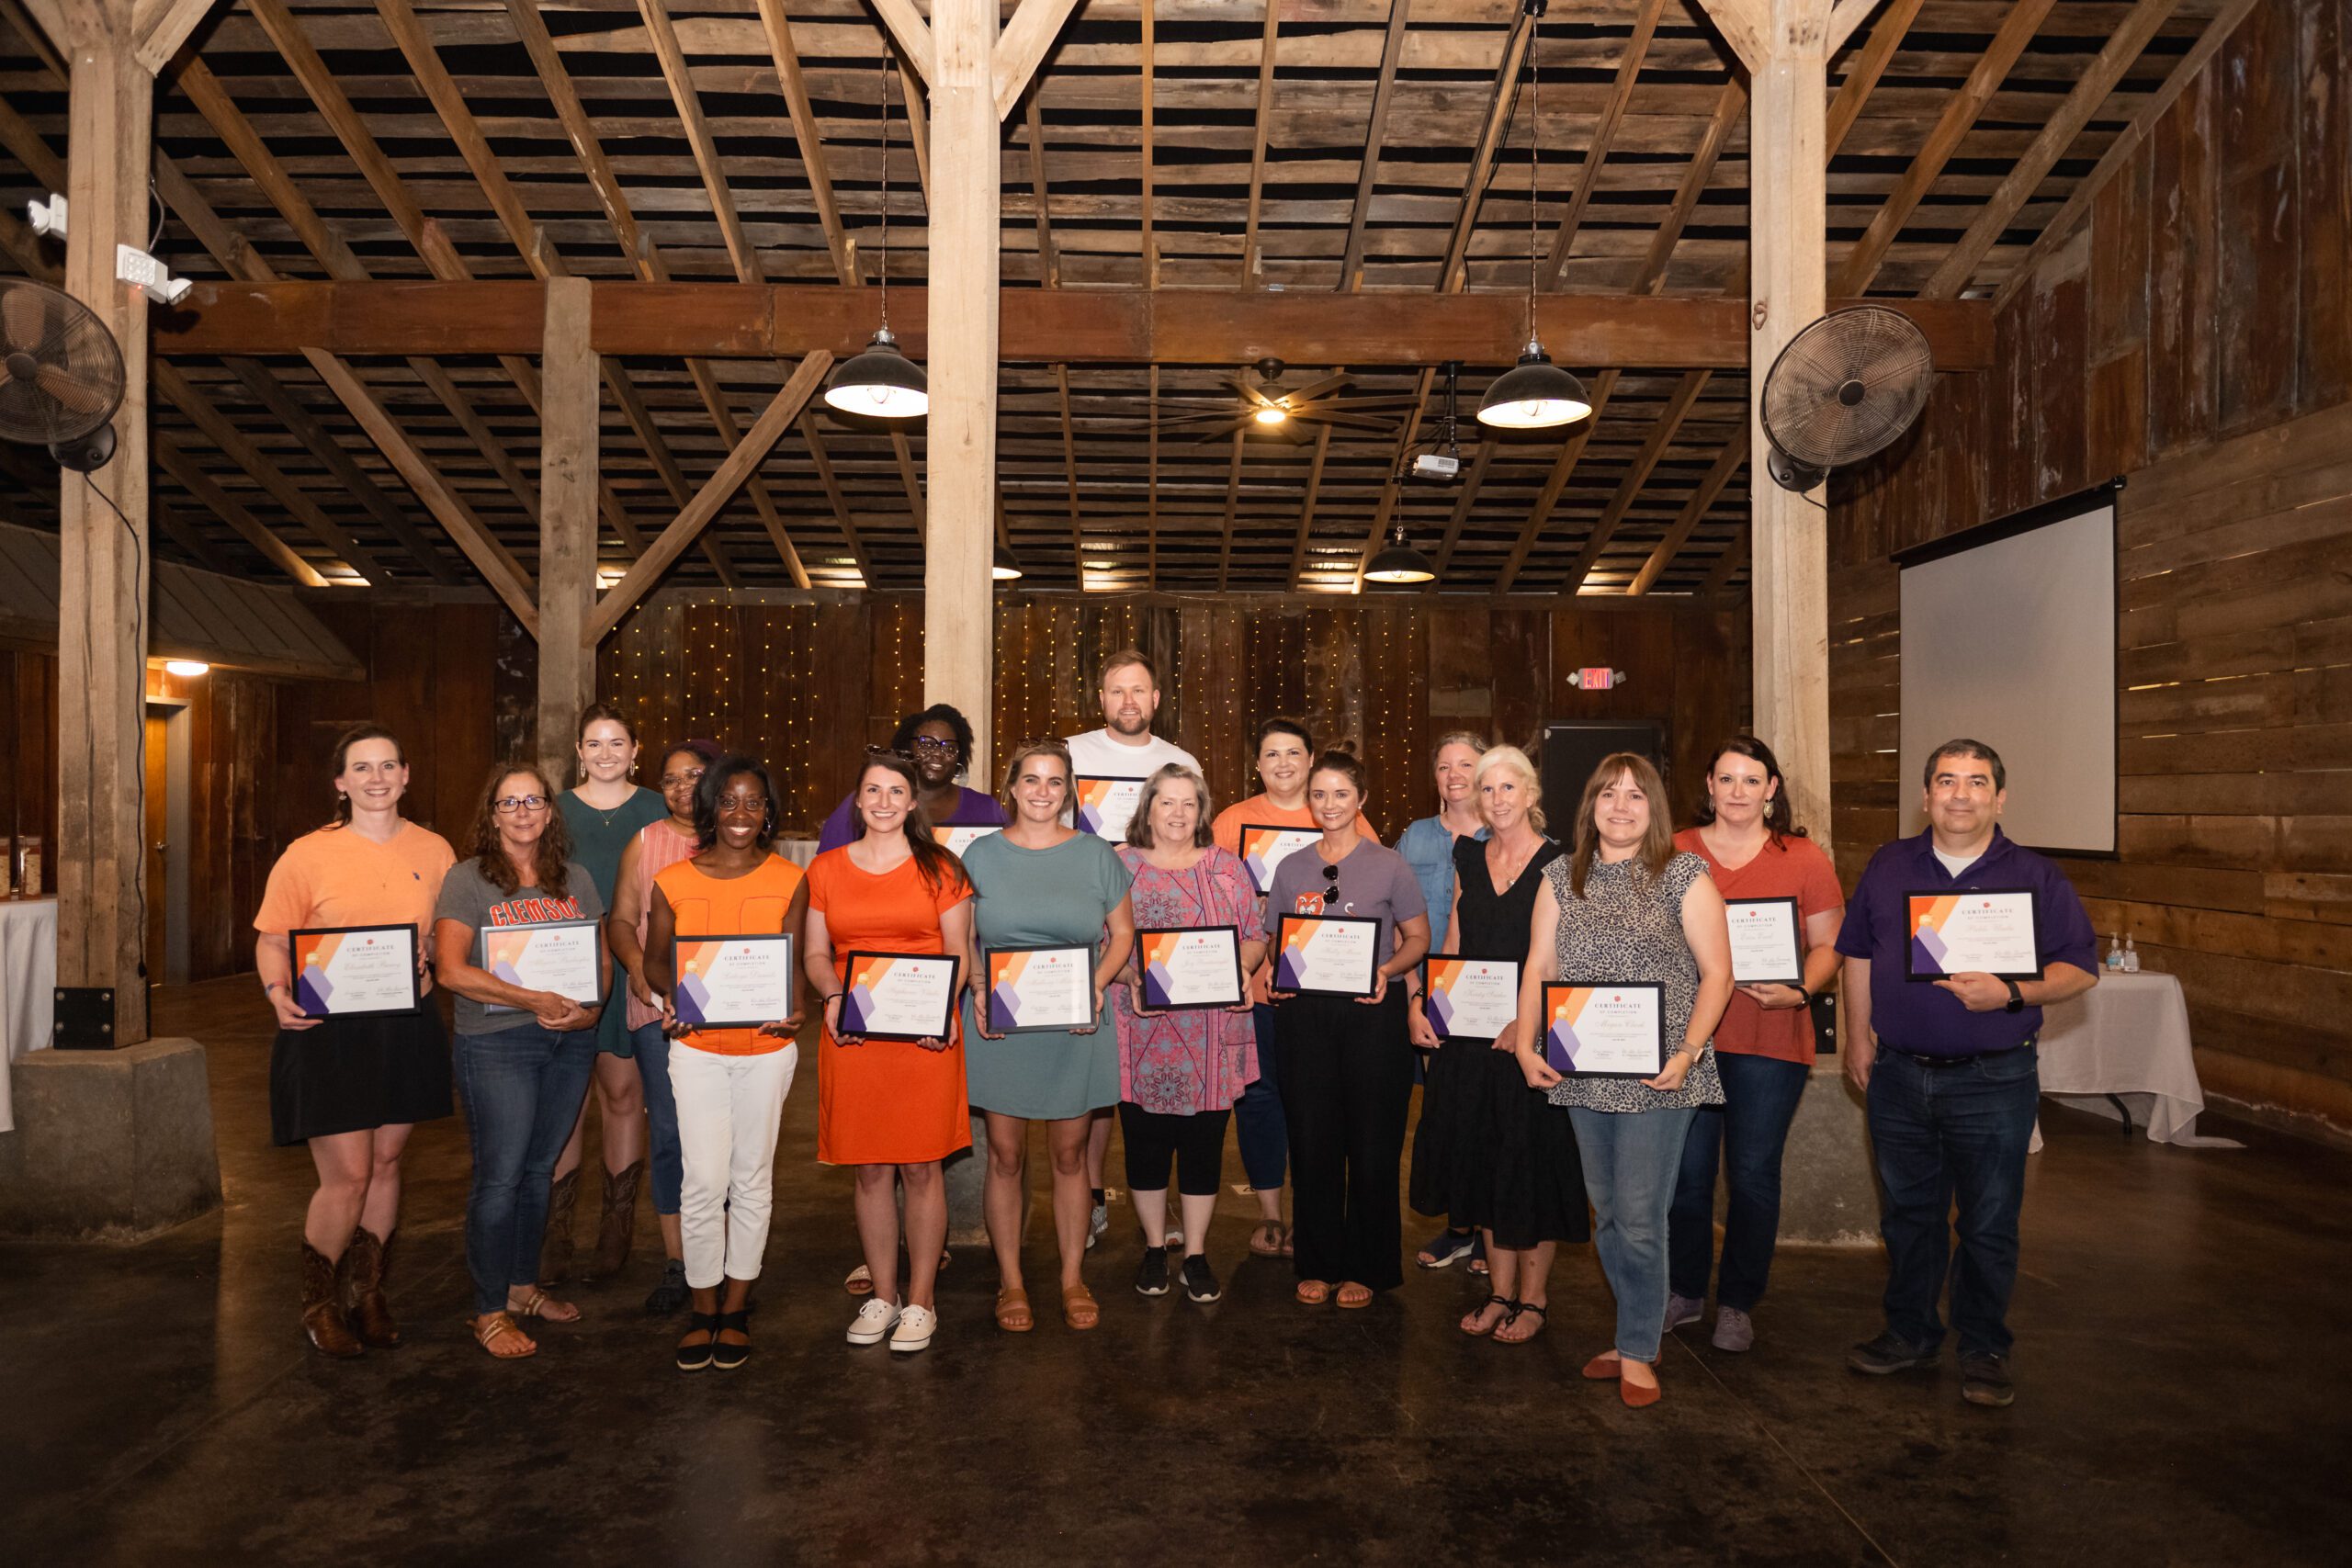 17 people stand in a group holding certificates inside a barn with tall wooden columns.